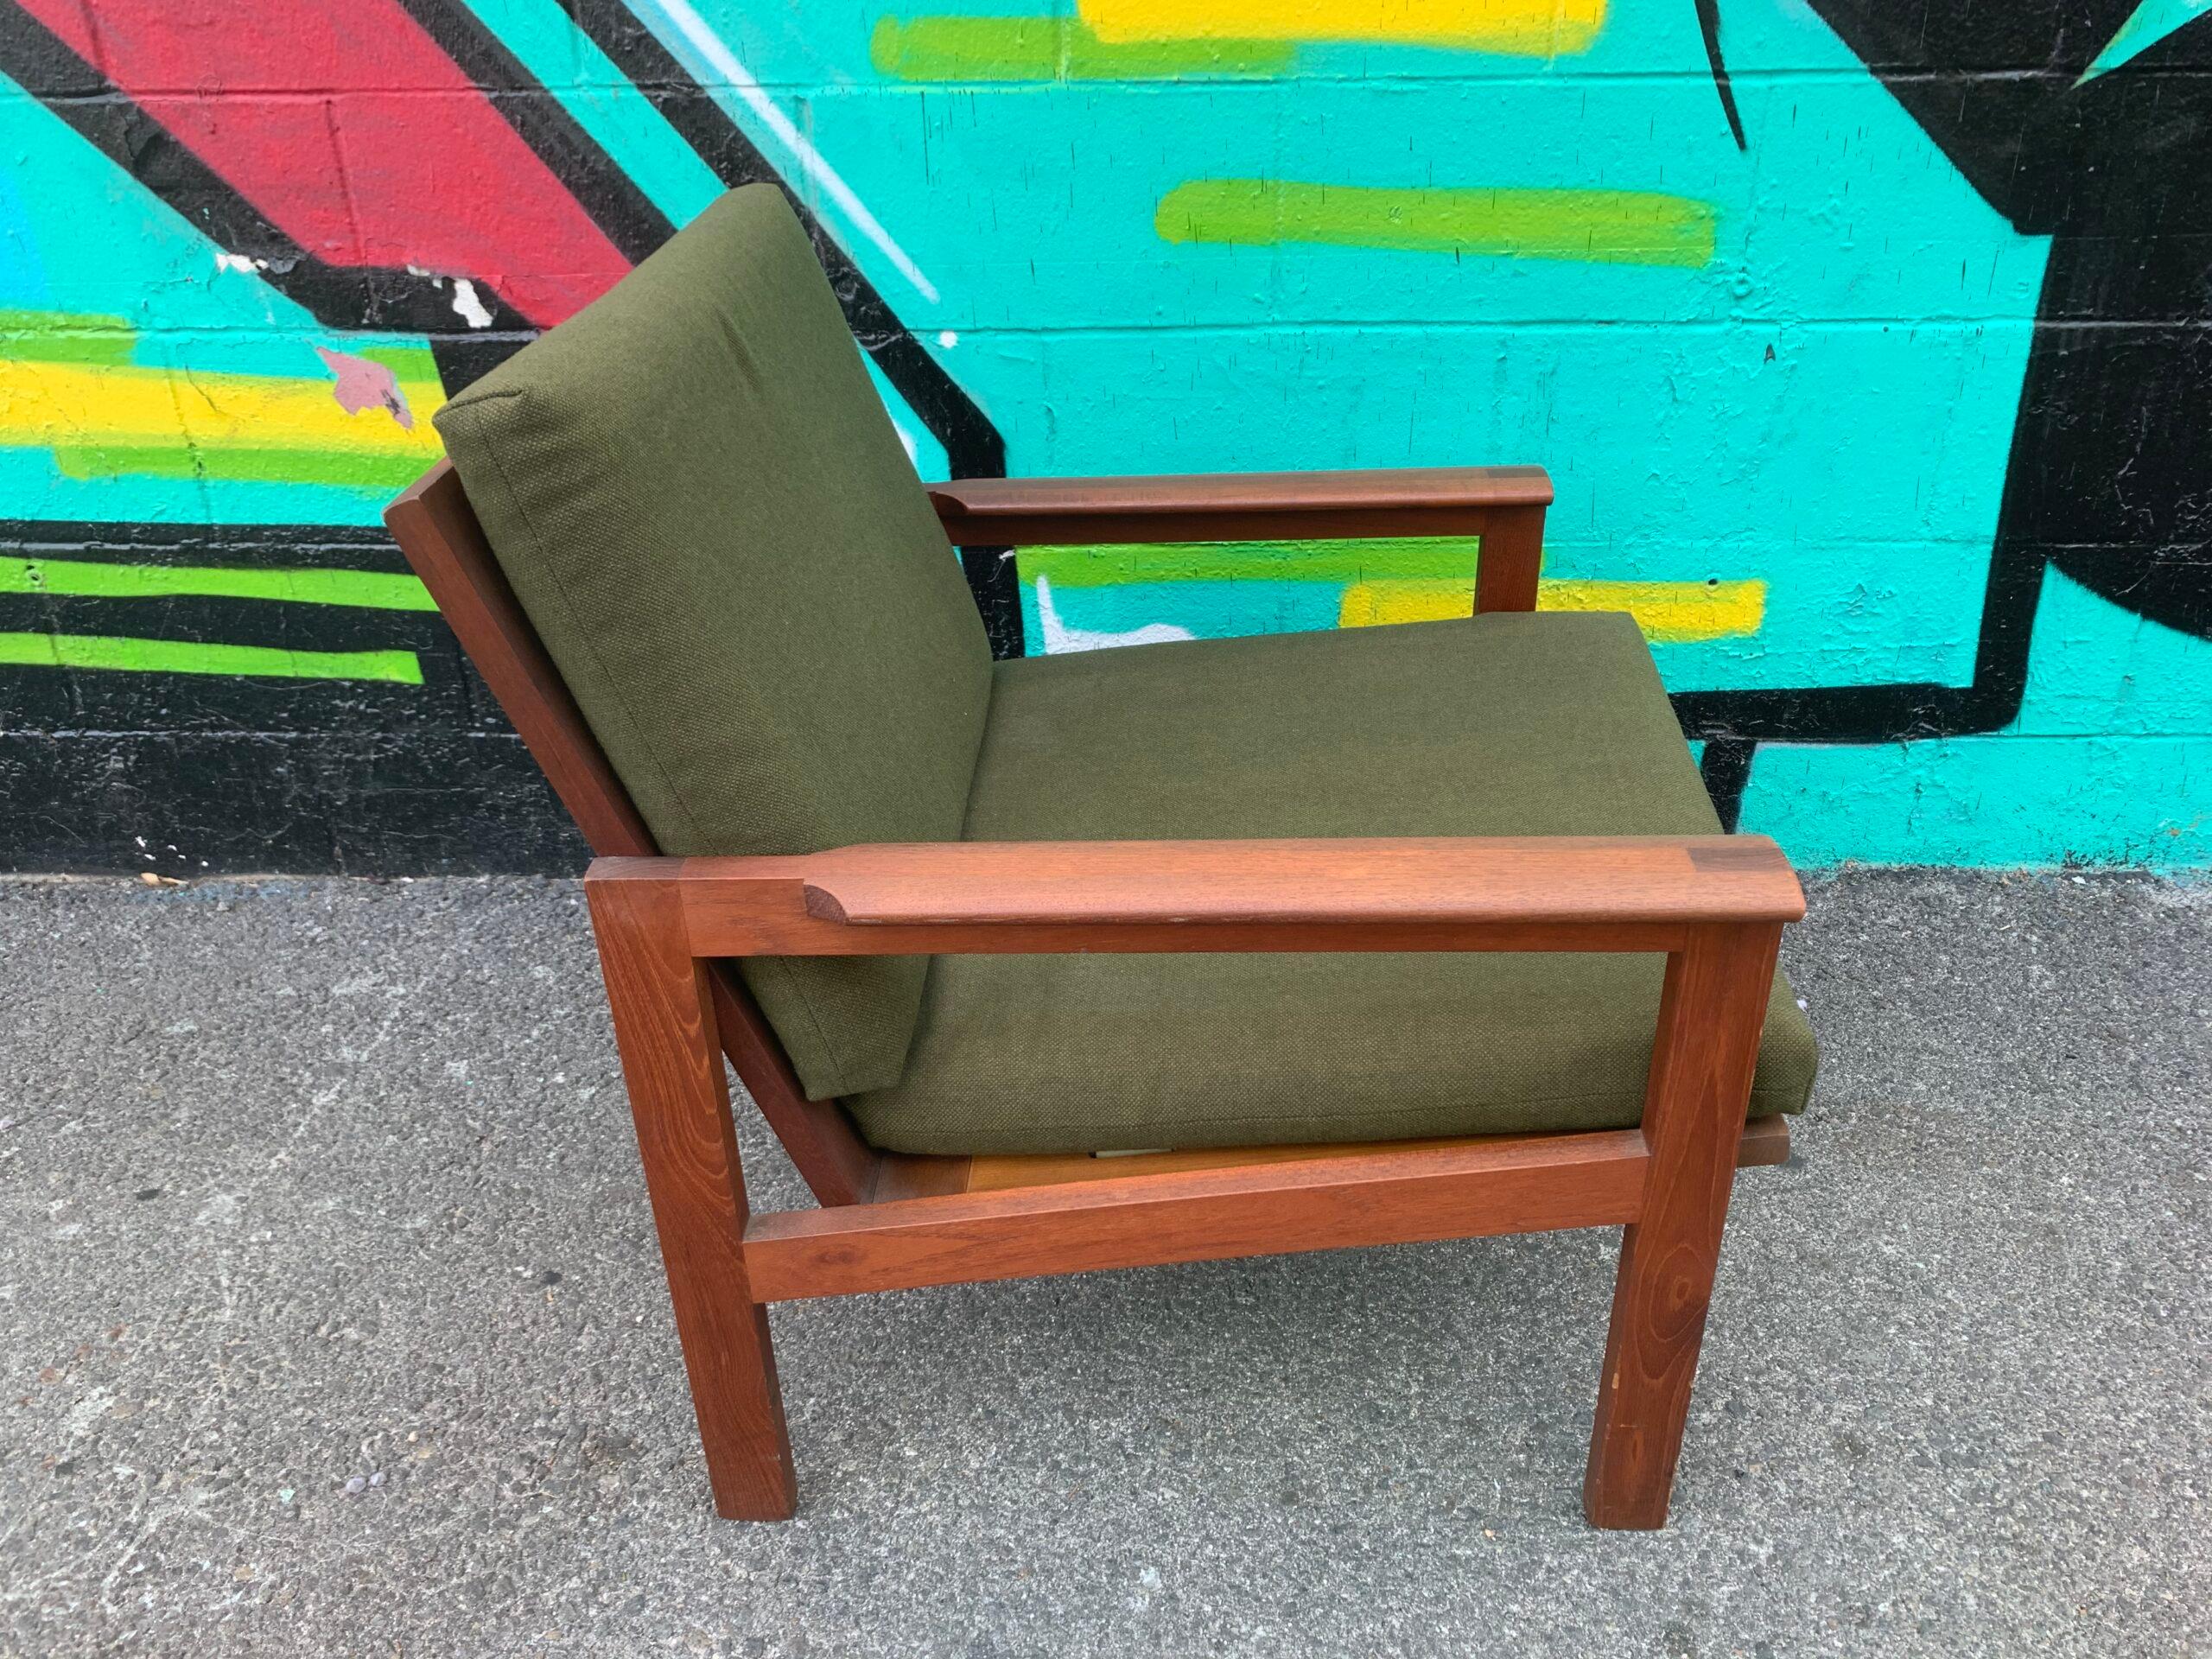 This Danish modern solid teak Capella easy chair was designed by Illum Wikkelsø in 1959 and manufactured by Niels Erik Eilersen. In good all orignal condition.